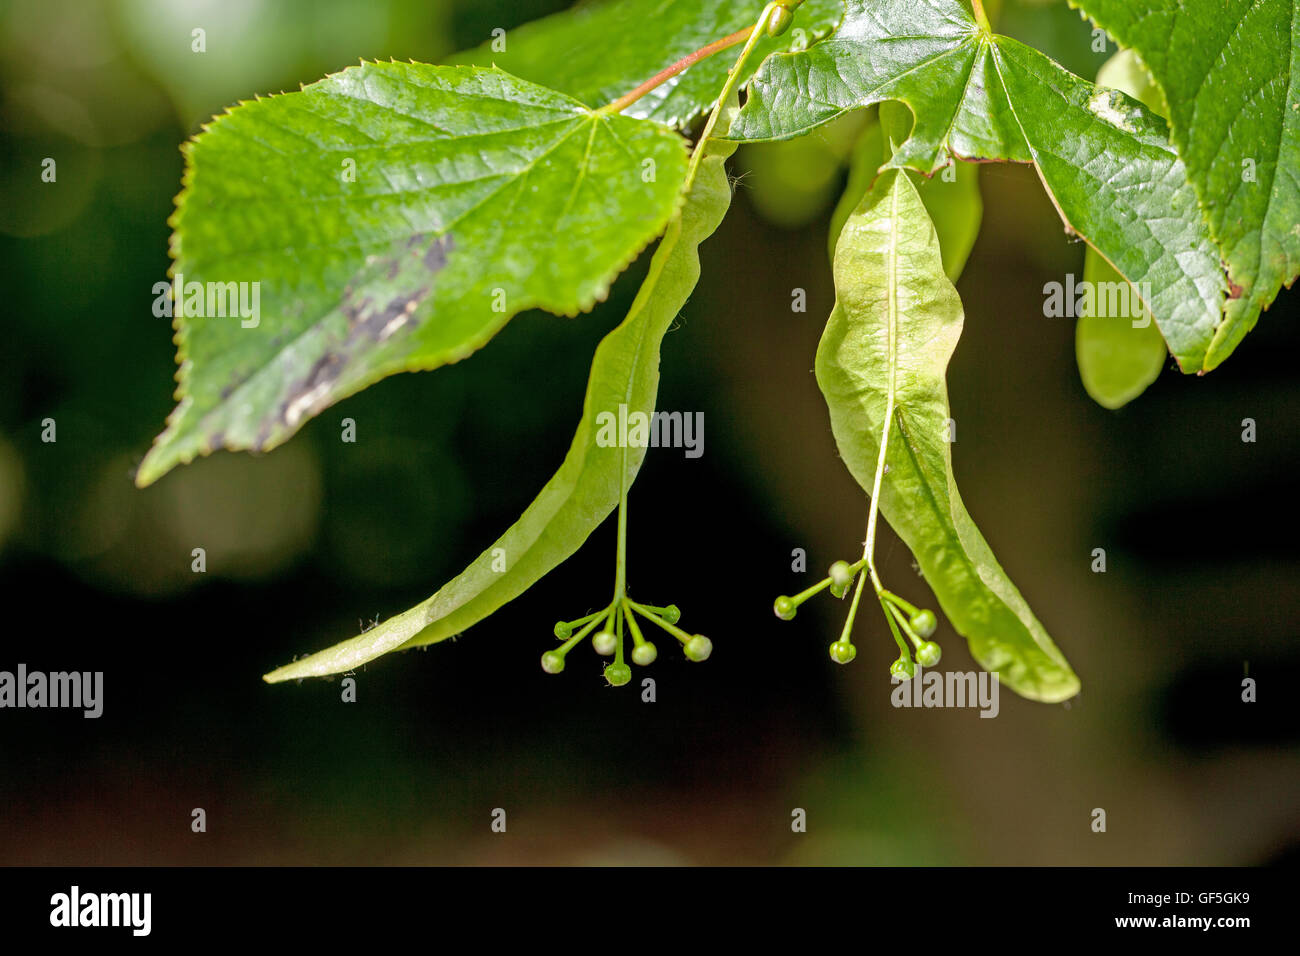 Small-leaved Lime (Tilia cordata ). Winged fruits still attached to tree branch. Stock Photo